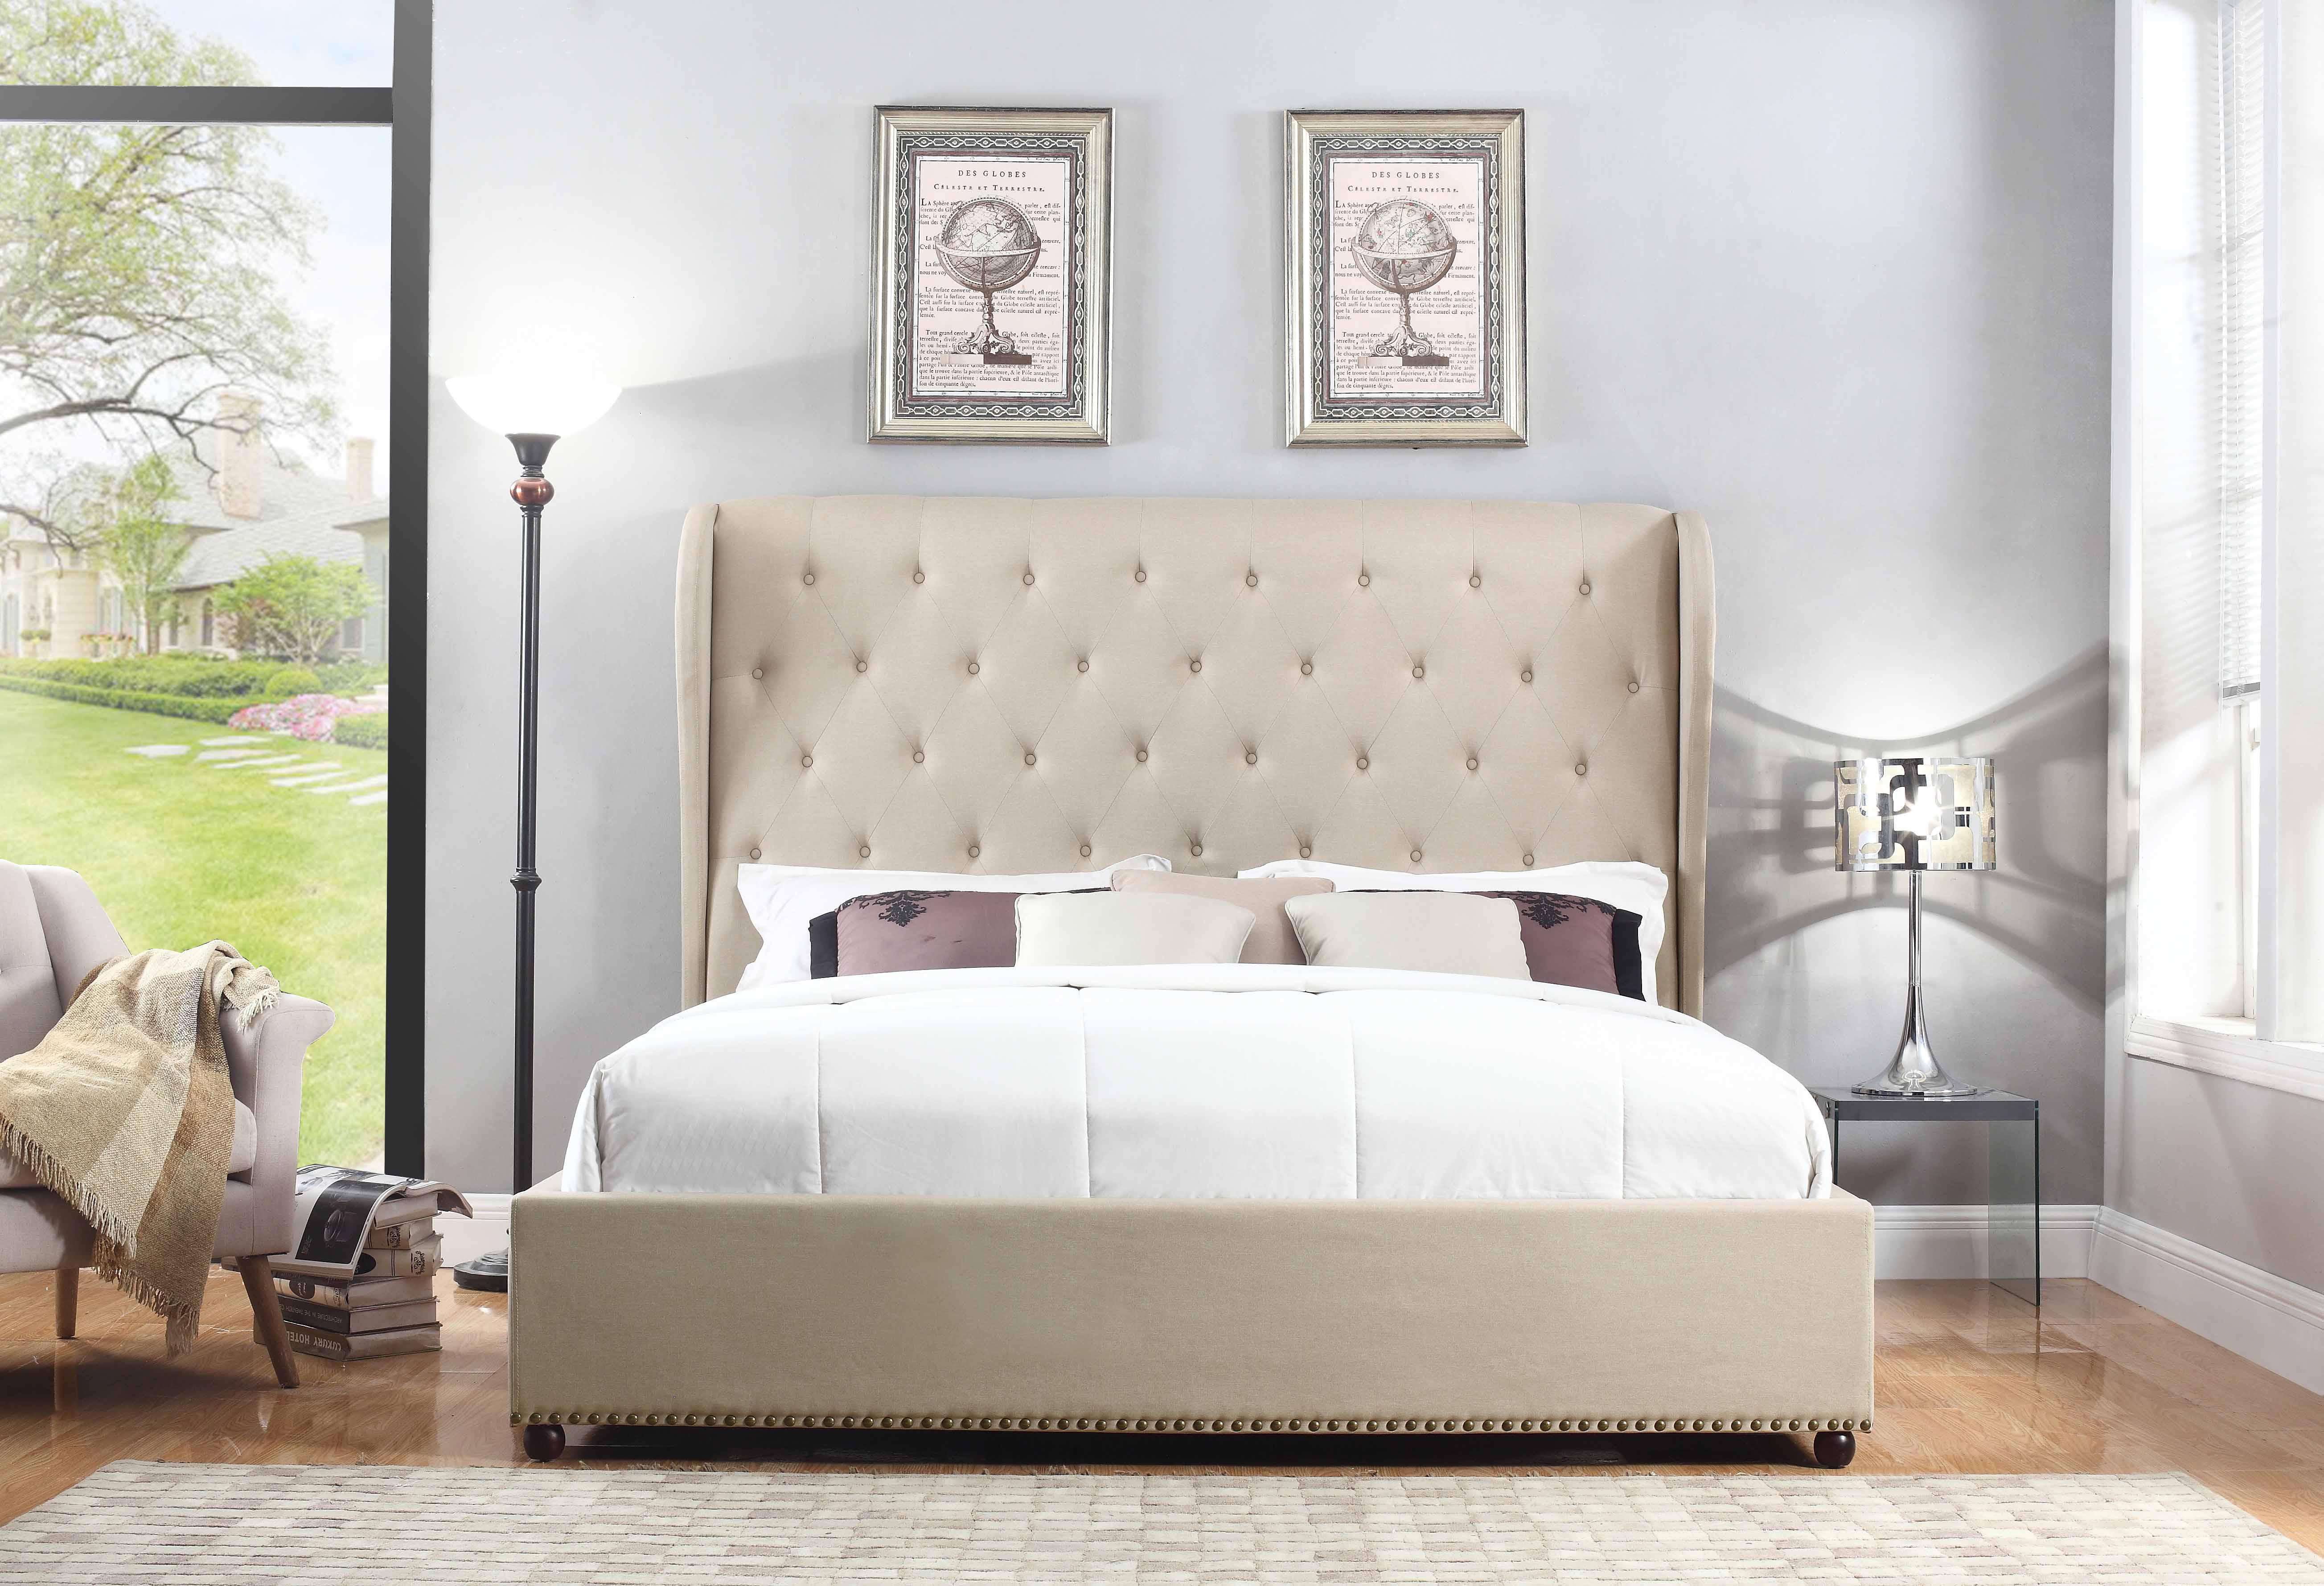 Bed Frame Queen Size in Beige Fabric Upholstered French Provincial High Bedhead